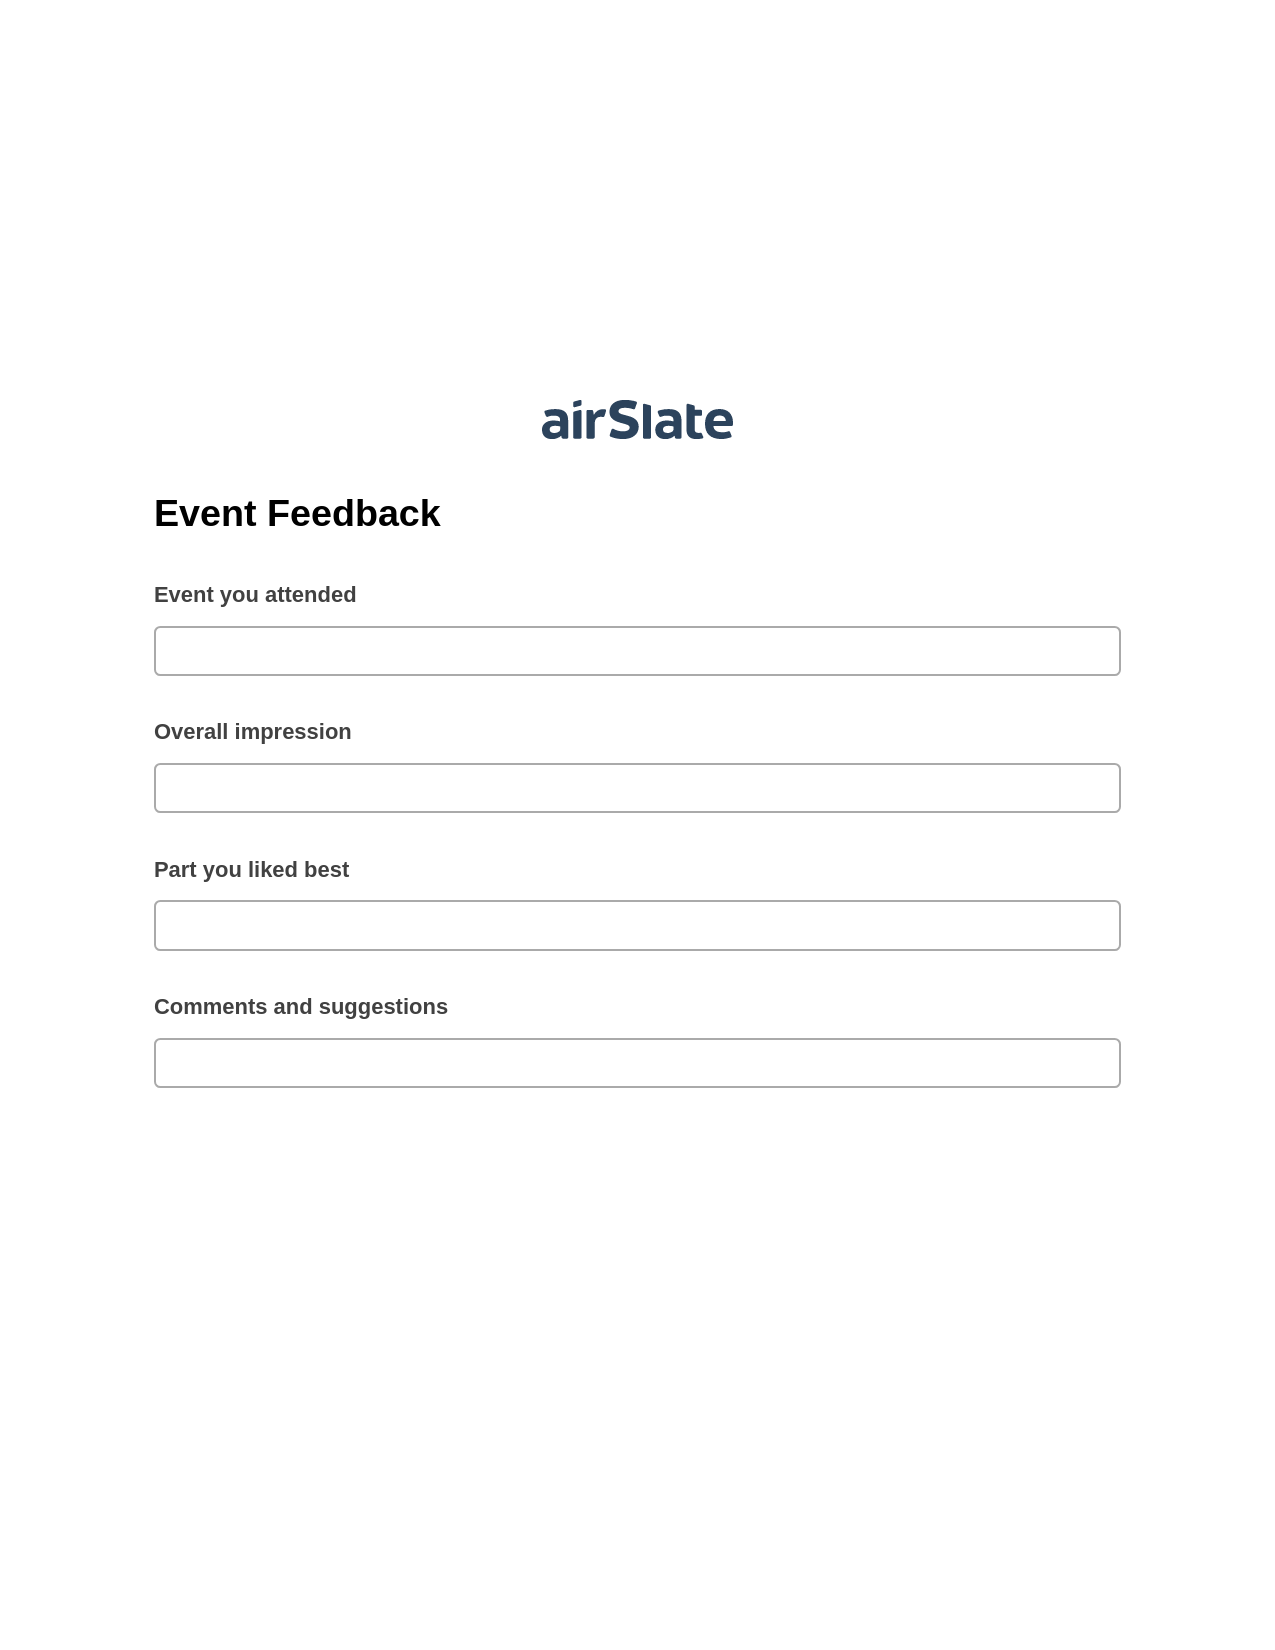 Event Feedback Pre-fill Slate from MS Dynamics 365 Records Bot, Update MS Dynamics 365 Records Bot, Google Drive Bot